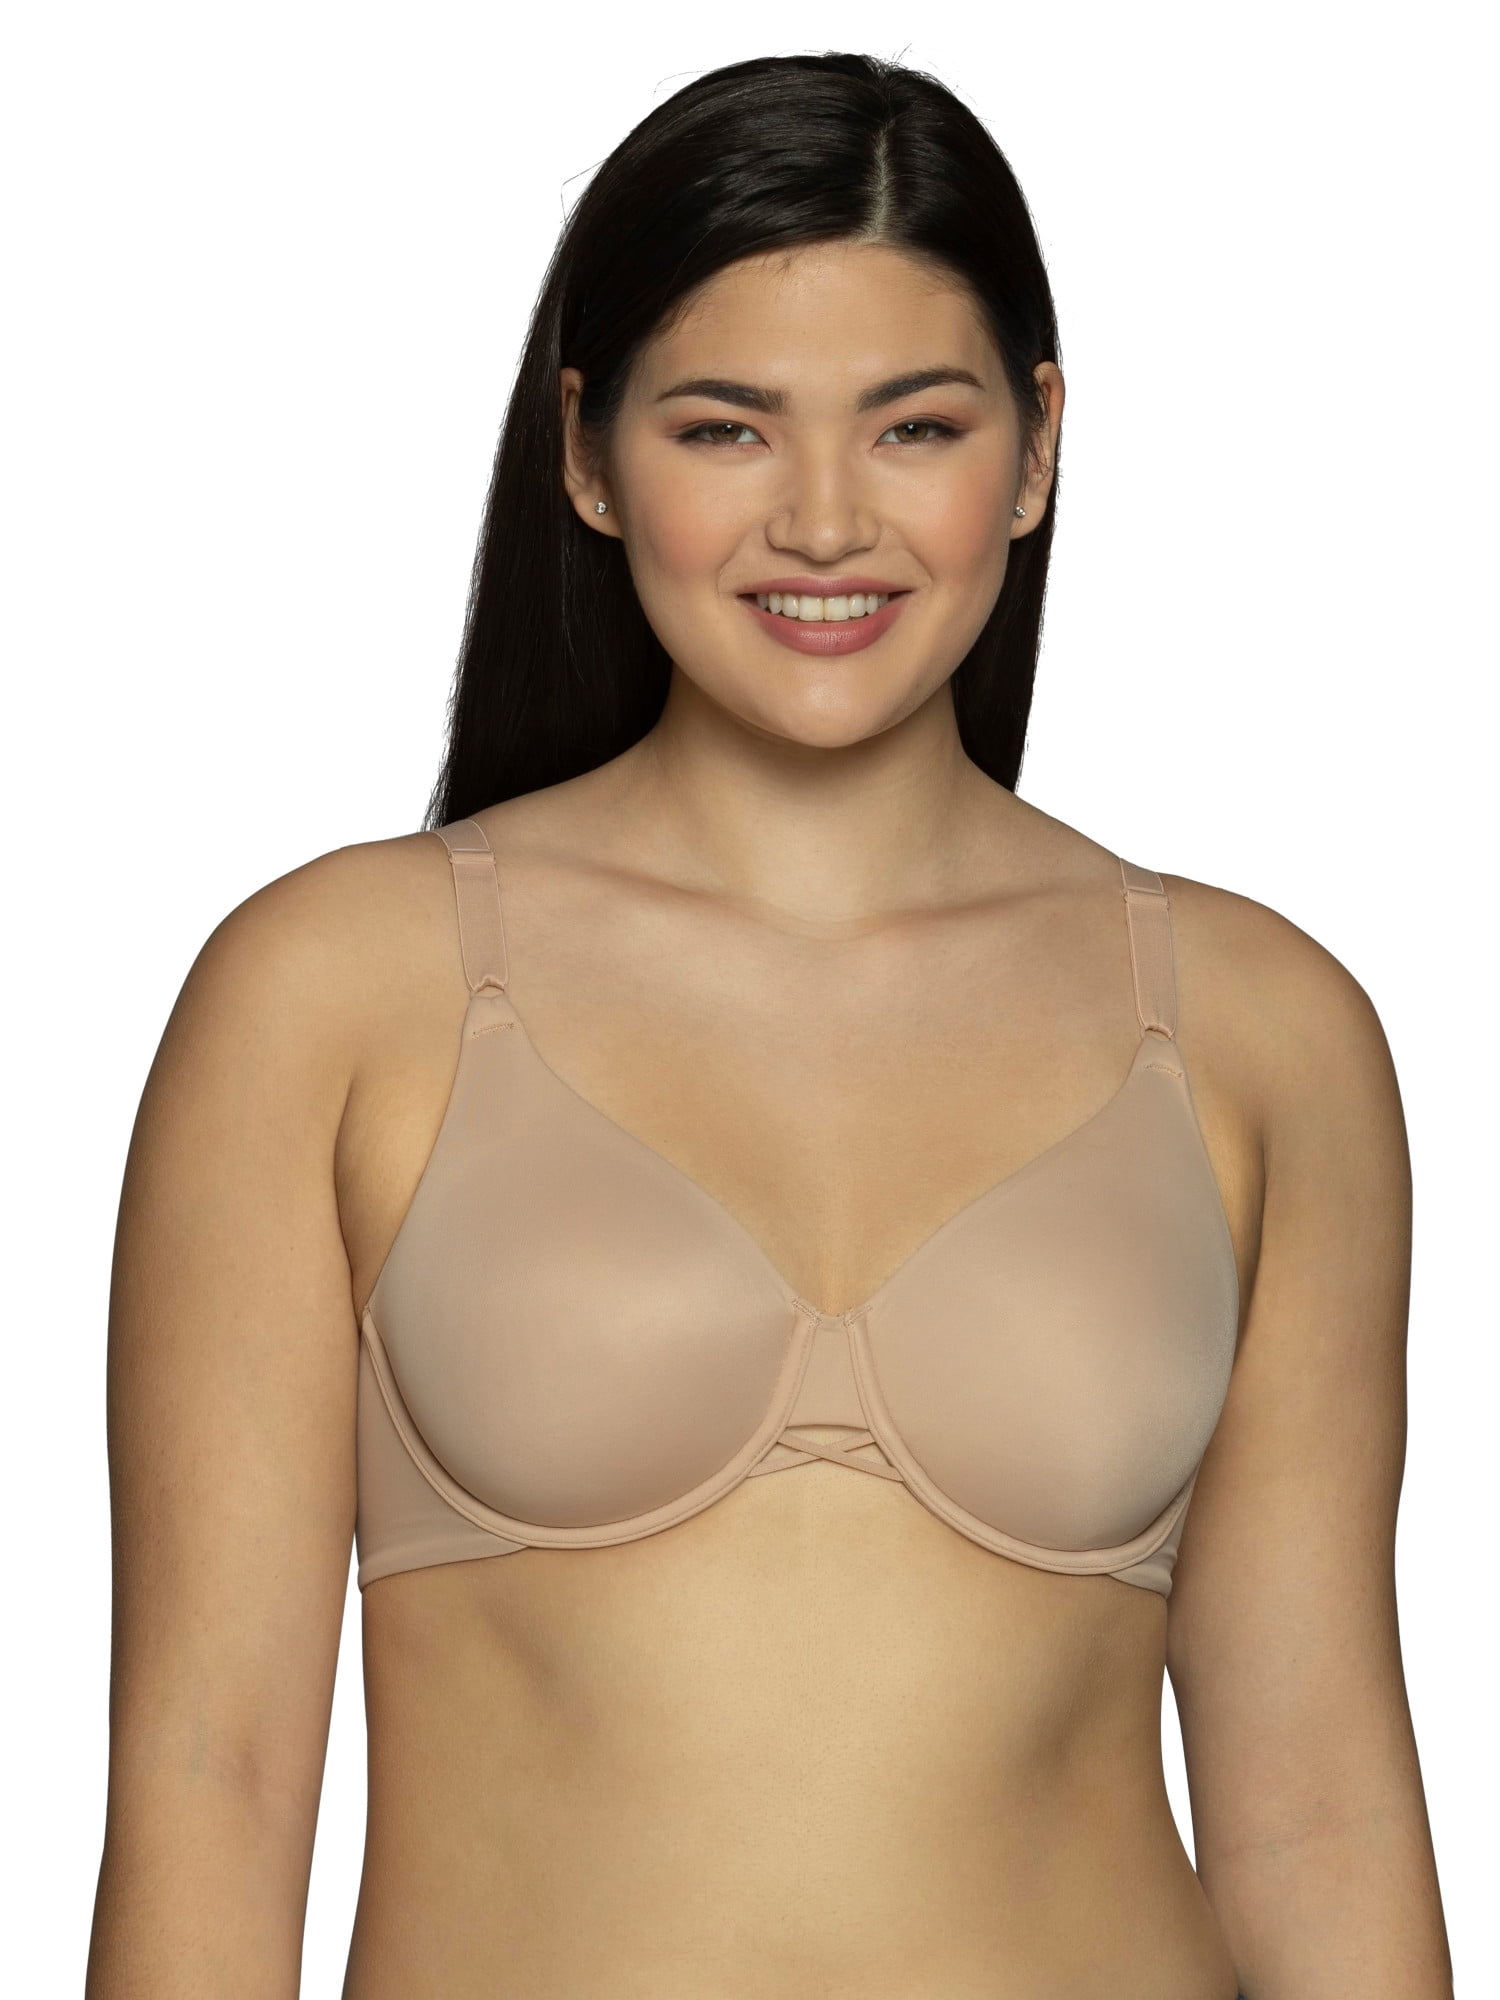 Playtex Secrets Perfectly Smooth Underwire Bra, Style 4747 